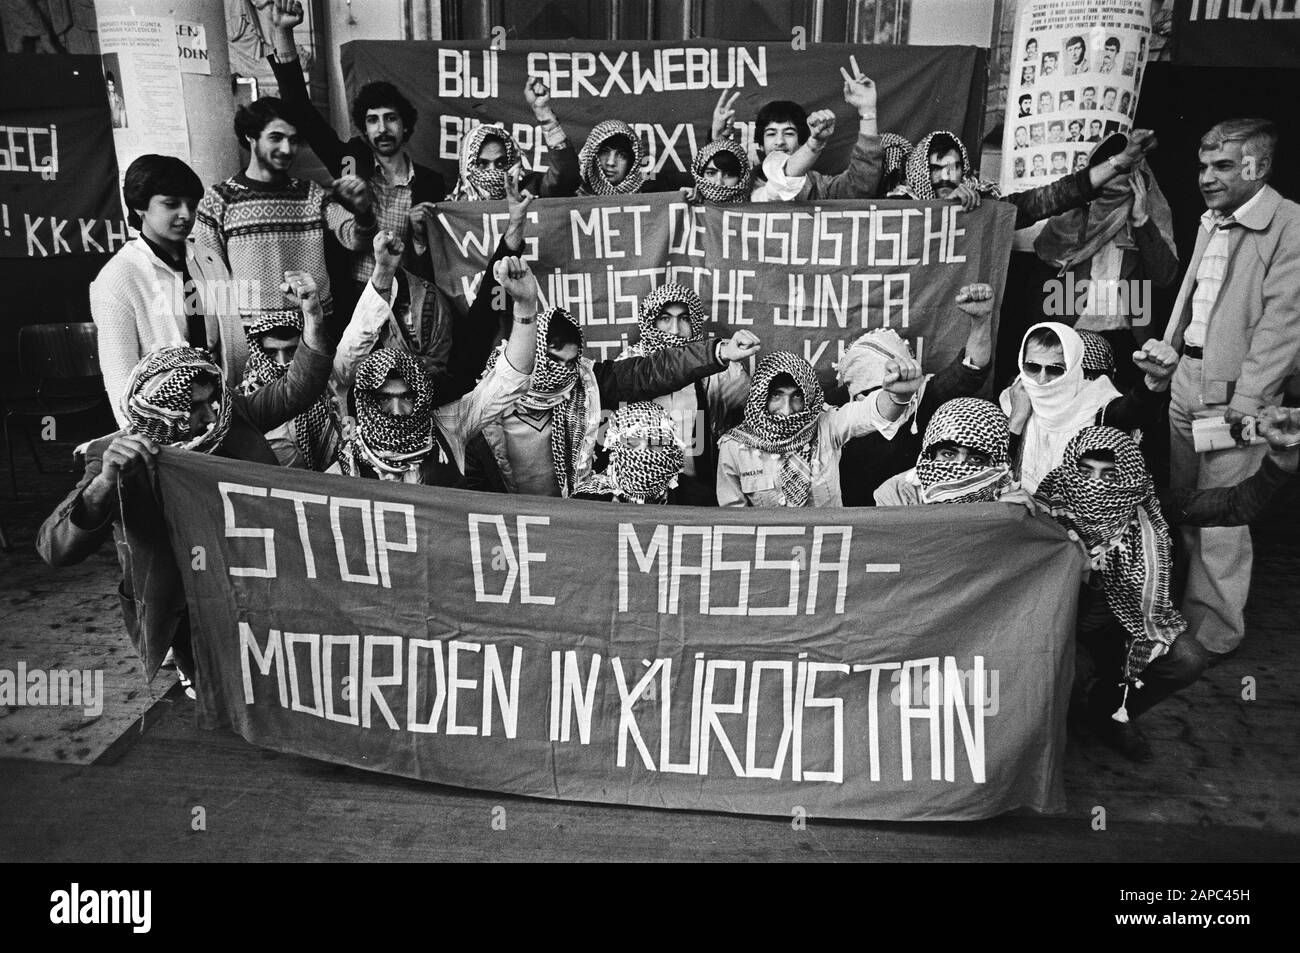 25 Kurdish Turks in the Moses and Aaron Church on hunger strike against trials now being conducted against Kurds in Turkey Date: 15 april 1981 Location: Amsterdam, Noord-Holland Keywords: hunger strikes Institution name: Moses and Aaronkerk Stock Photo